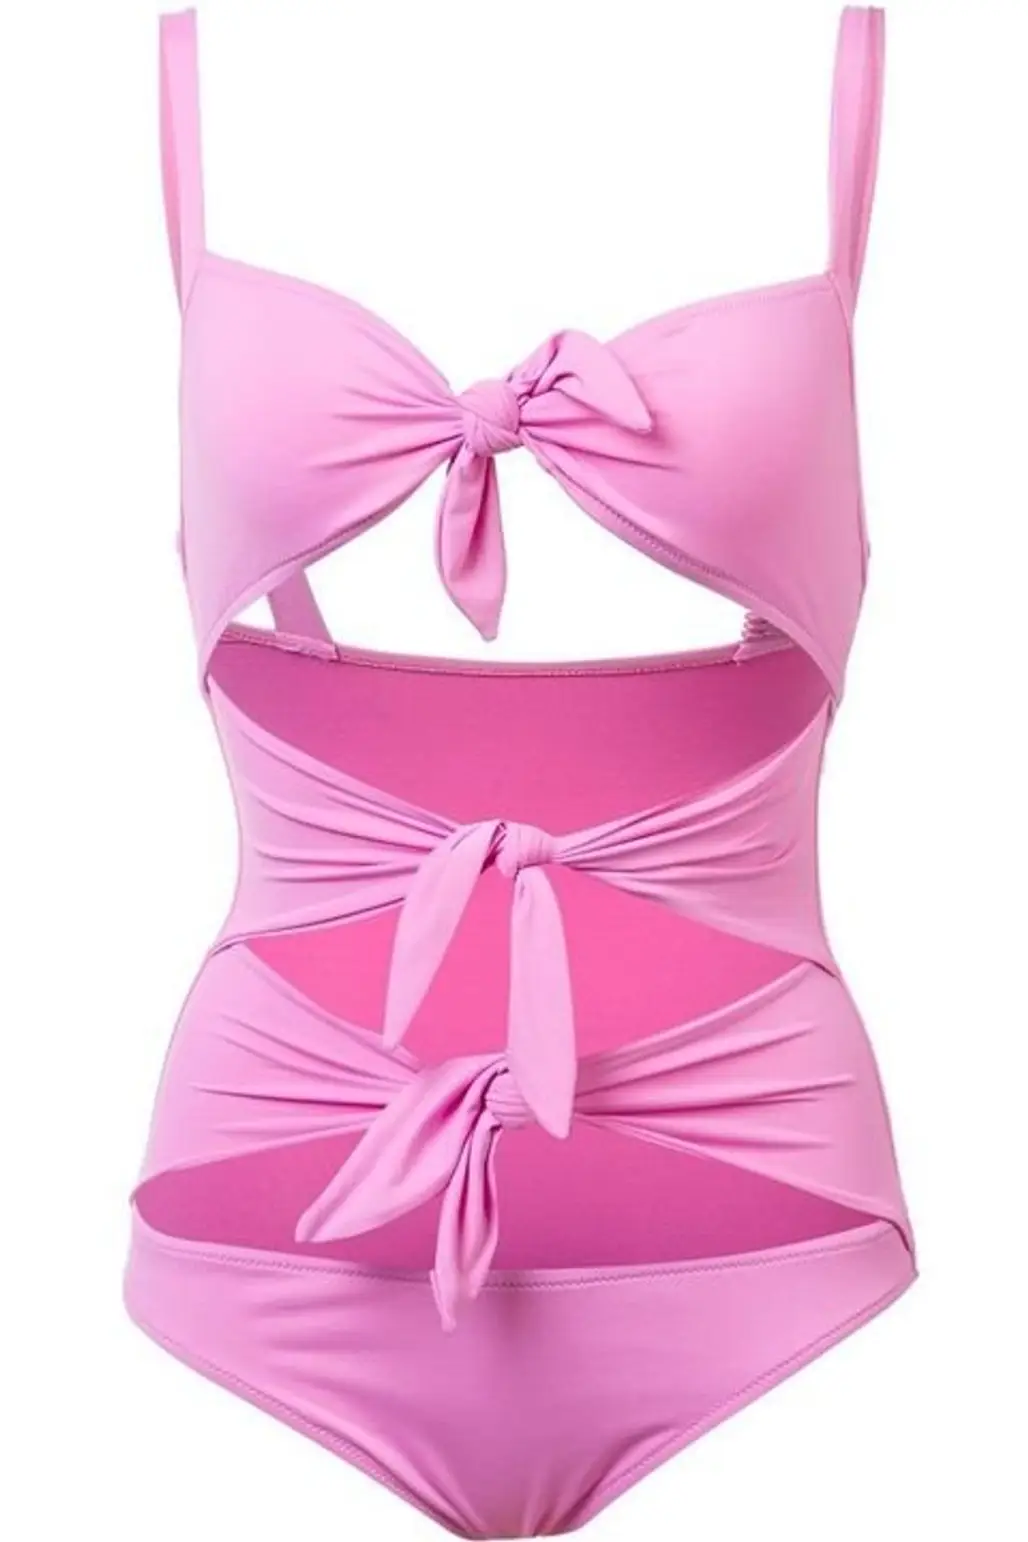 pink, swimwear, one piece swimsuit, clothing, maillot,